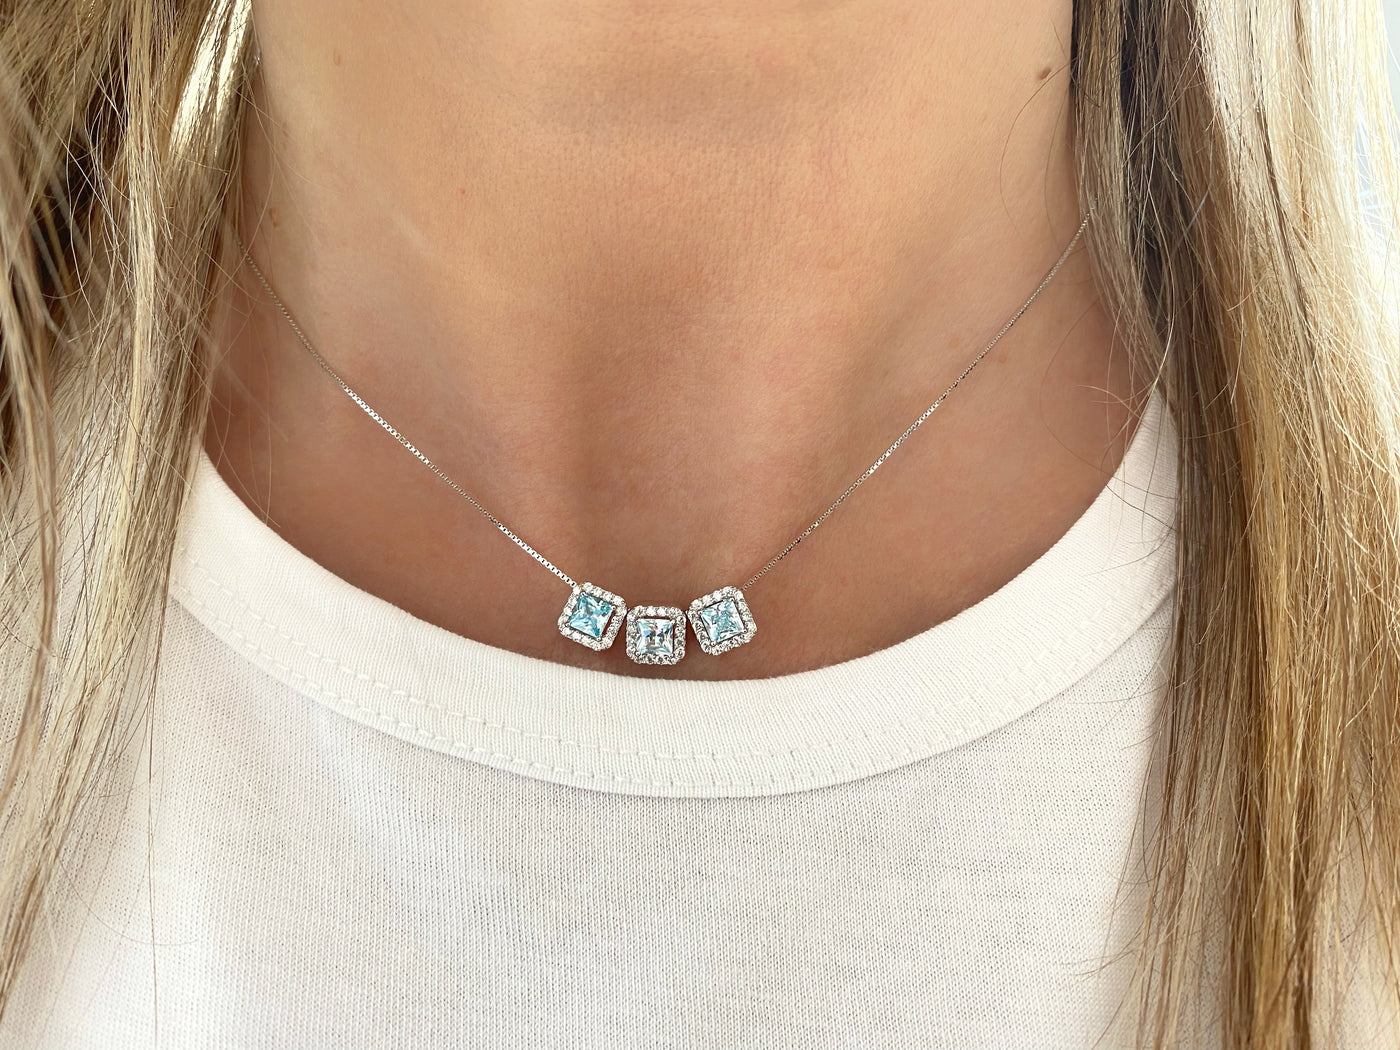 Silver necklace with trilogy carrè stone charm - rose